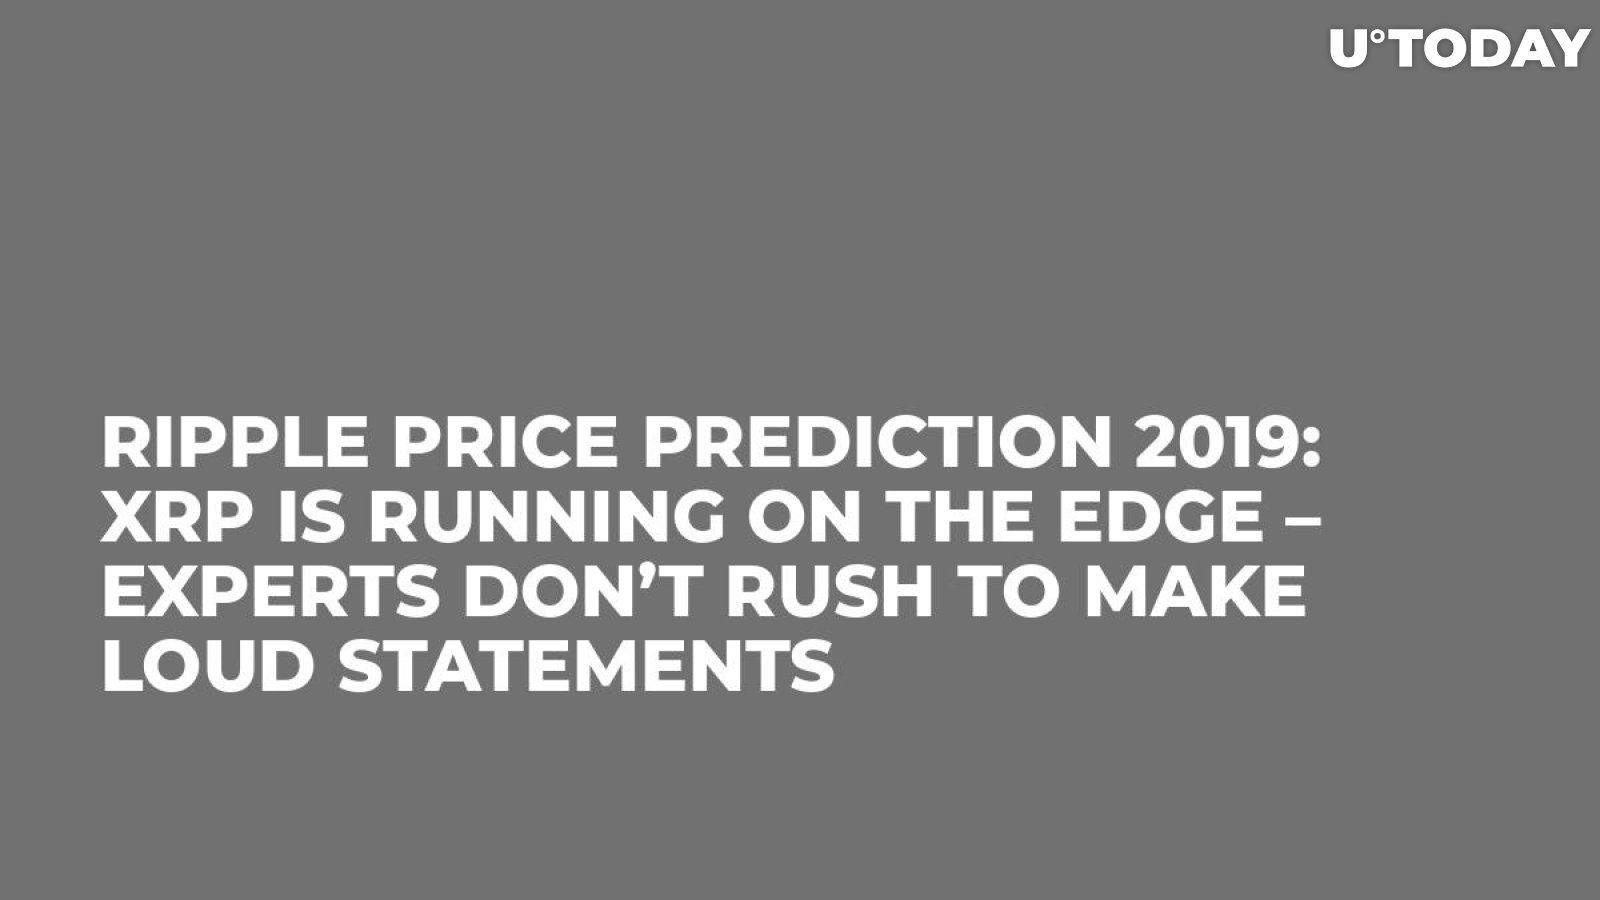 Ripple Price Prediction 2019: XRP Is Running on the Edge – Experts Don’t Rush to Make Loud Statements